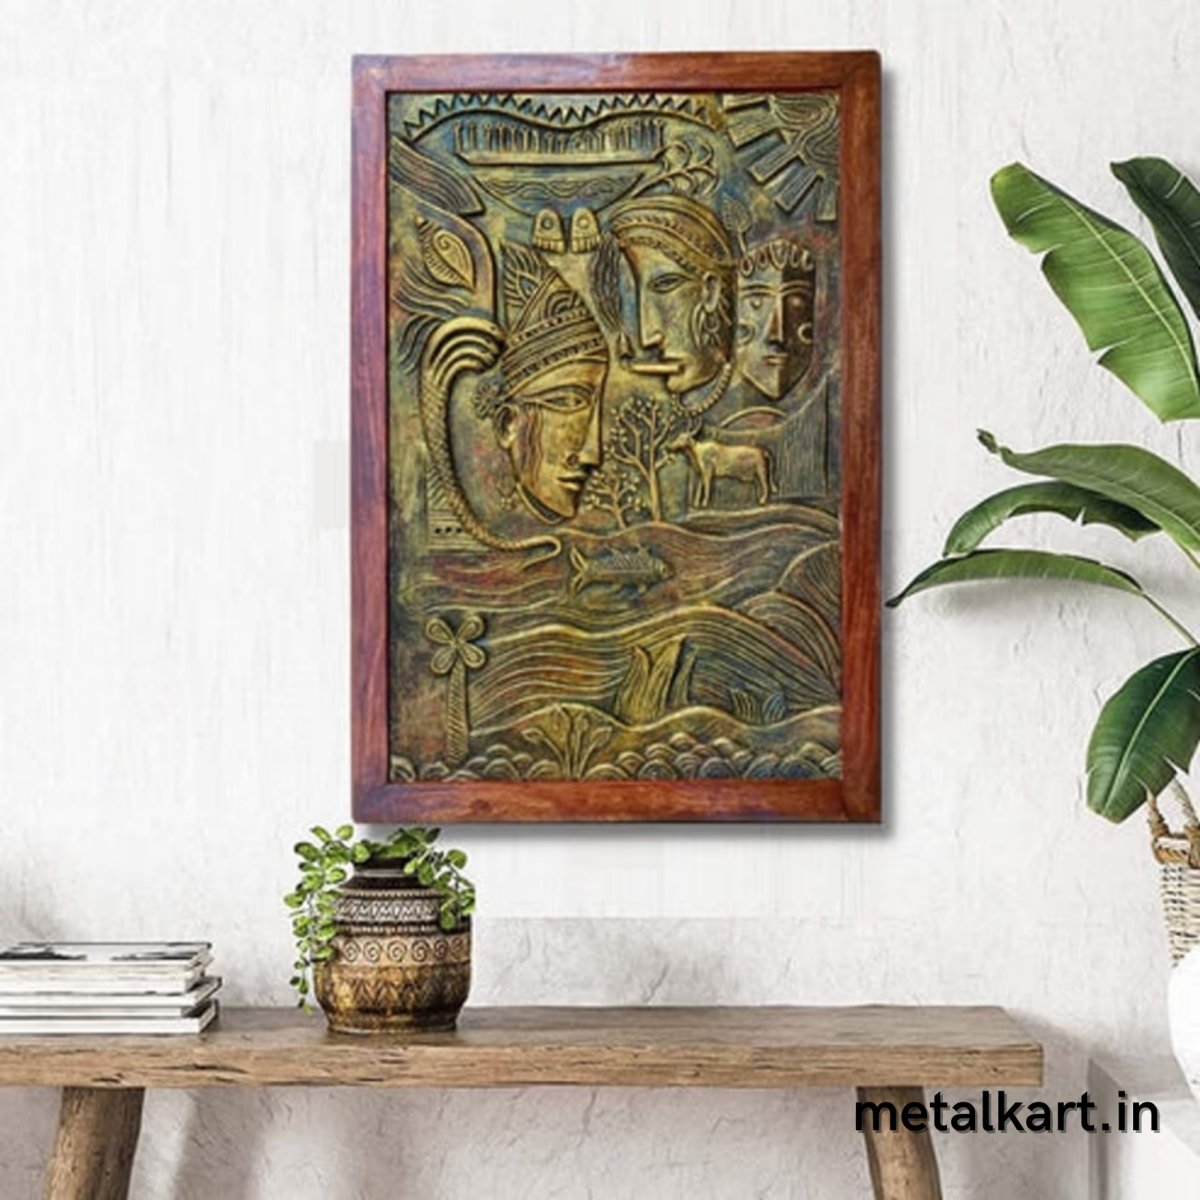 Radha Krishna 3D Relief Carving Cave Wall Art (36 x 24 Inches)